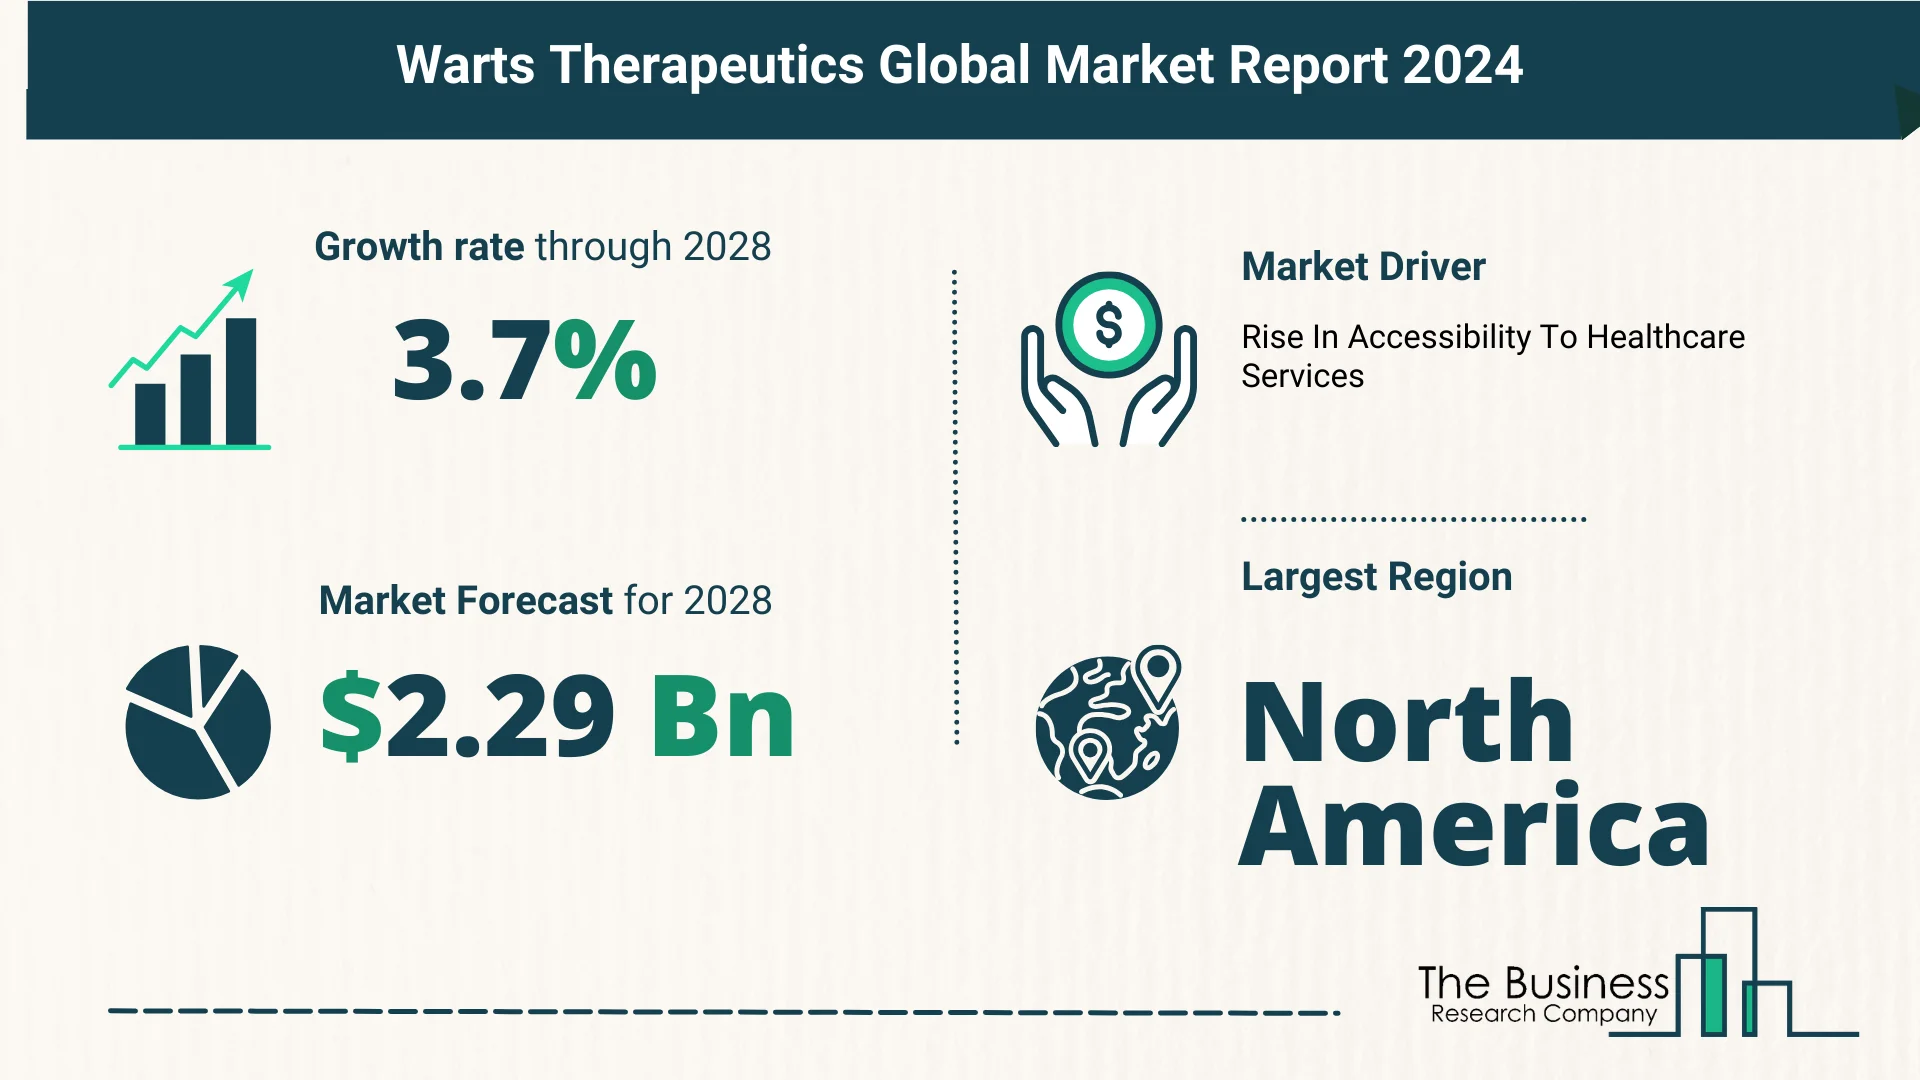 Top 5 Insights From The Warts Therapeutics Market Report 2024